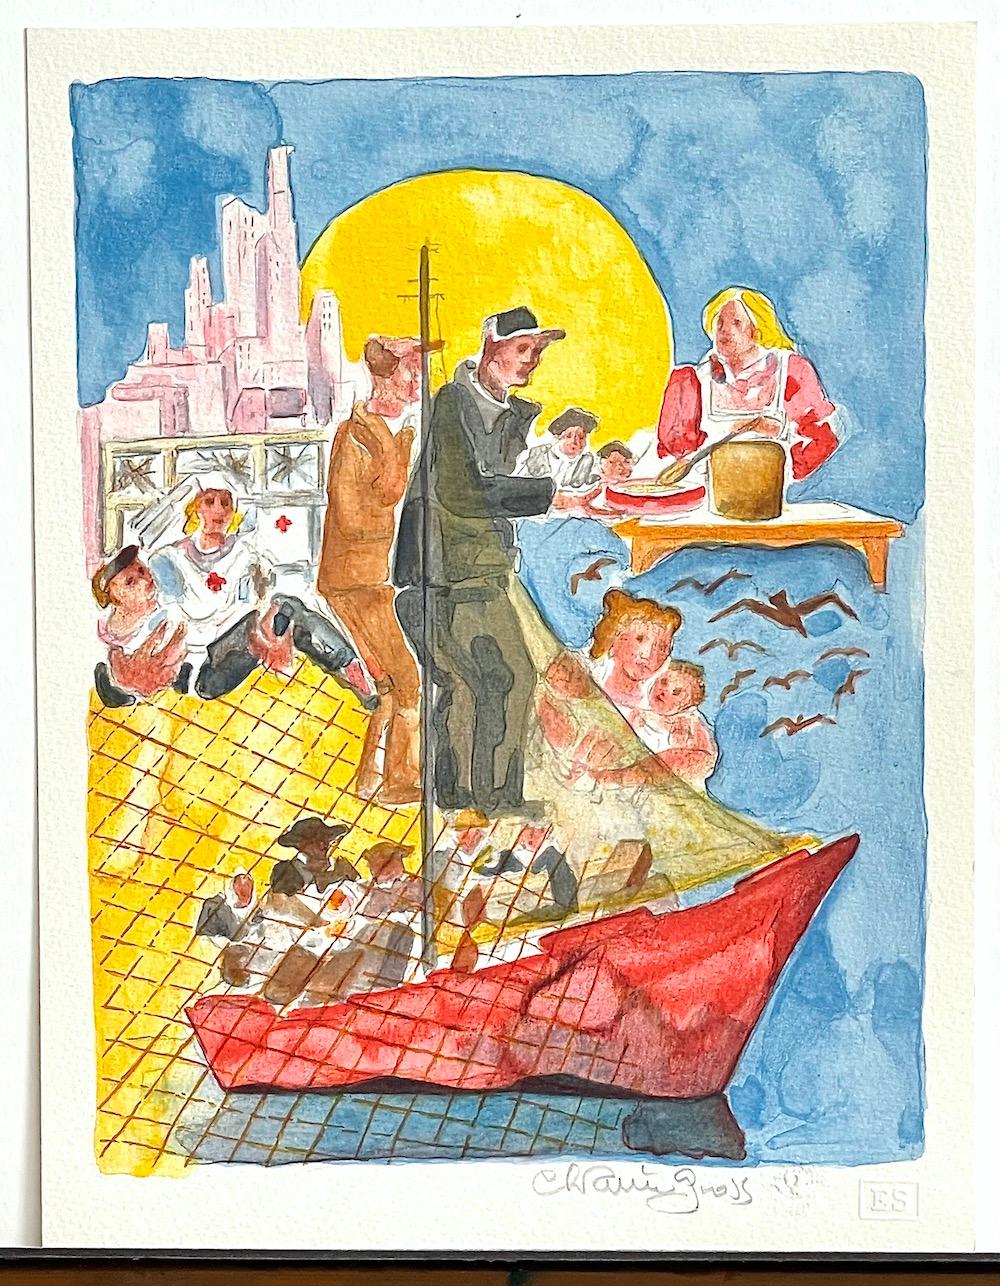 NEW IMMIGRANTS 1984 is a hand drawn lithograph by the American artist/sculptor Chaim Gross printed in 11 colors on archival Arches printmaking paper. NEW IMMIGRANTS 1984 depicts a figurative image of new immigrants arriving by boat against a